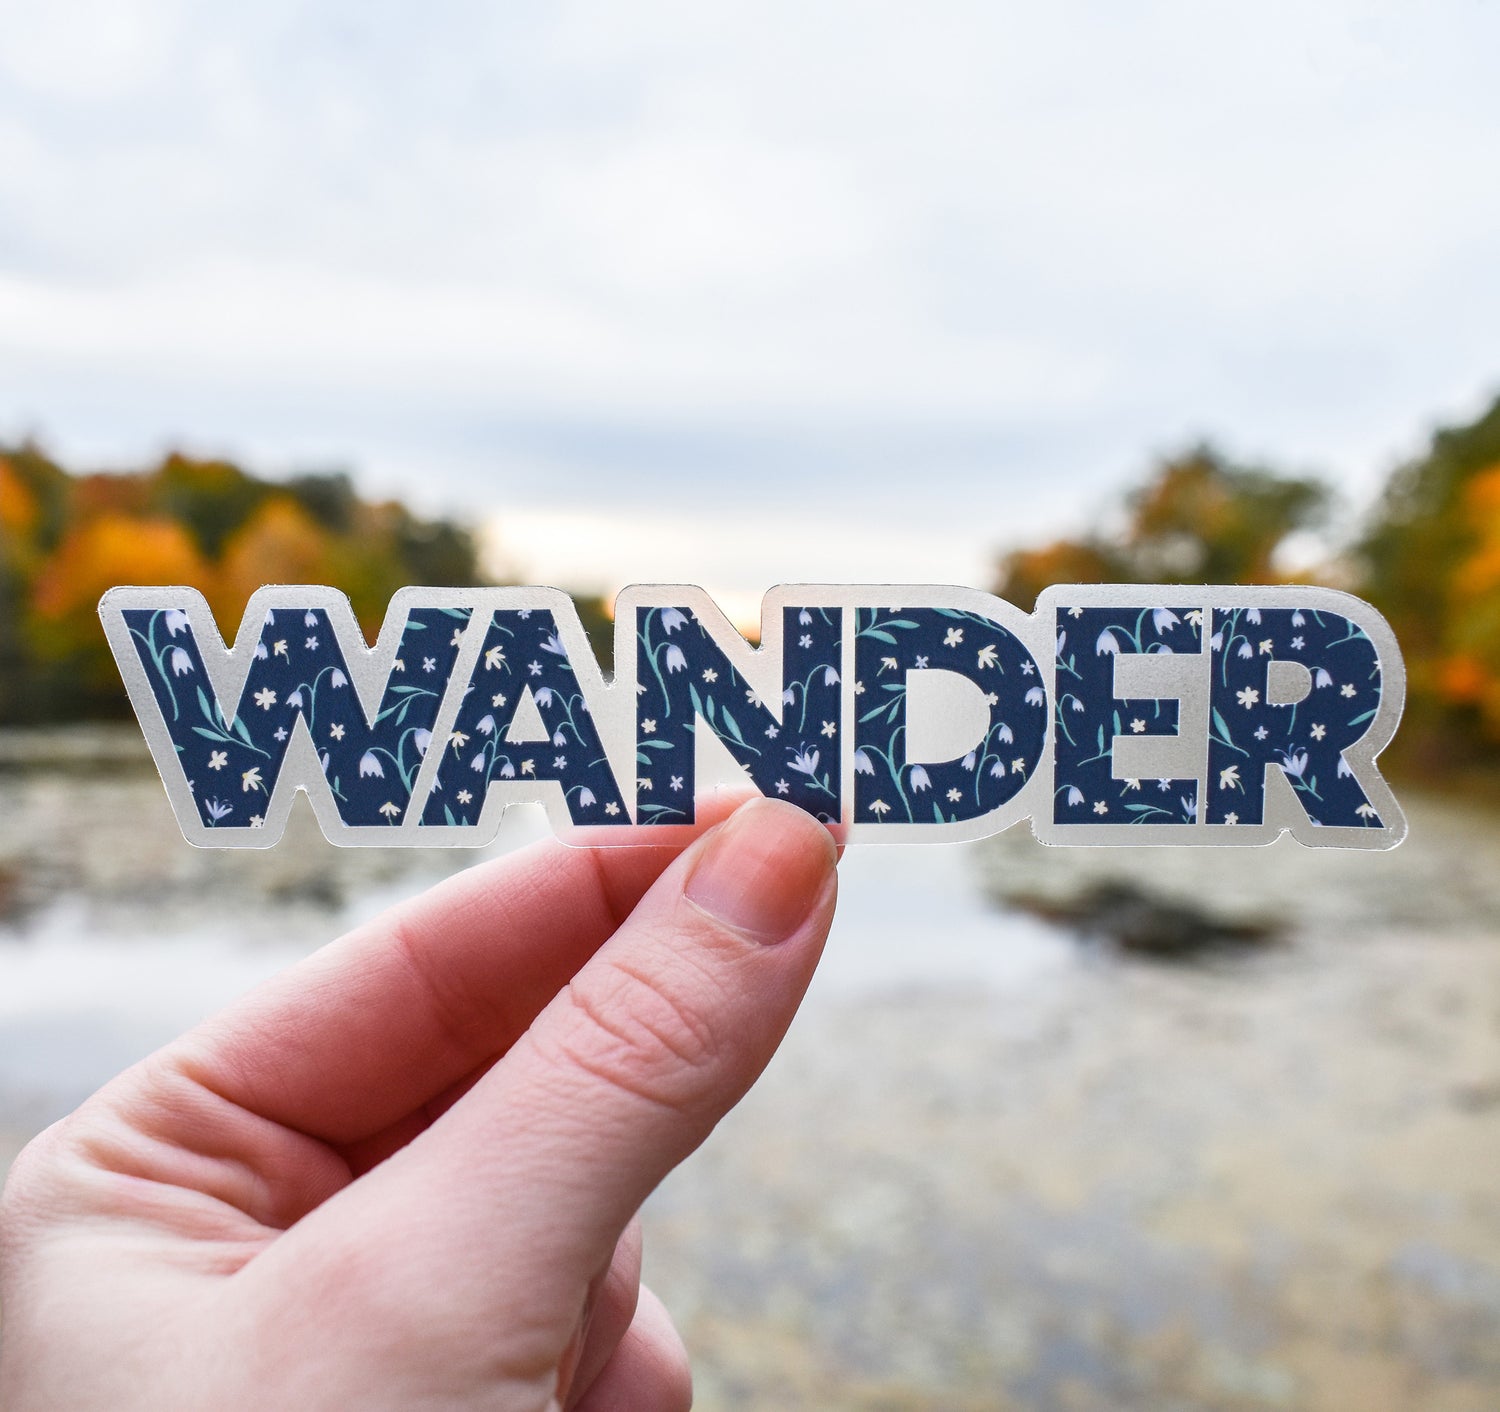 Wander clear vinyl sticker with a blue floral pattern